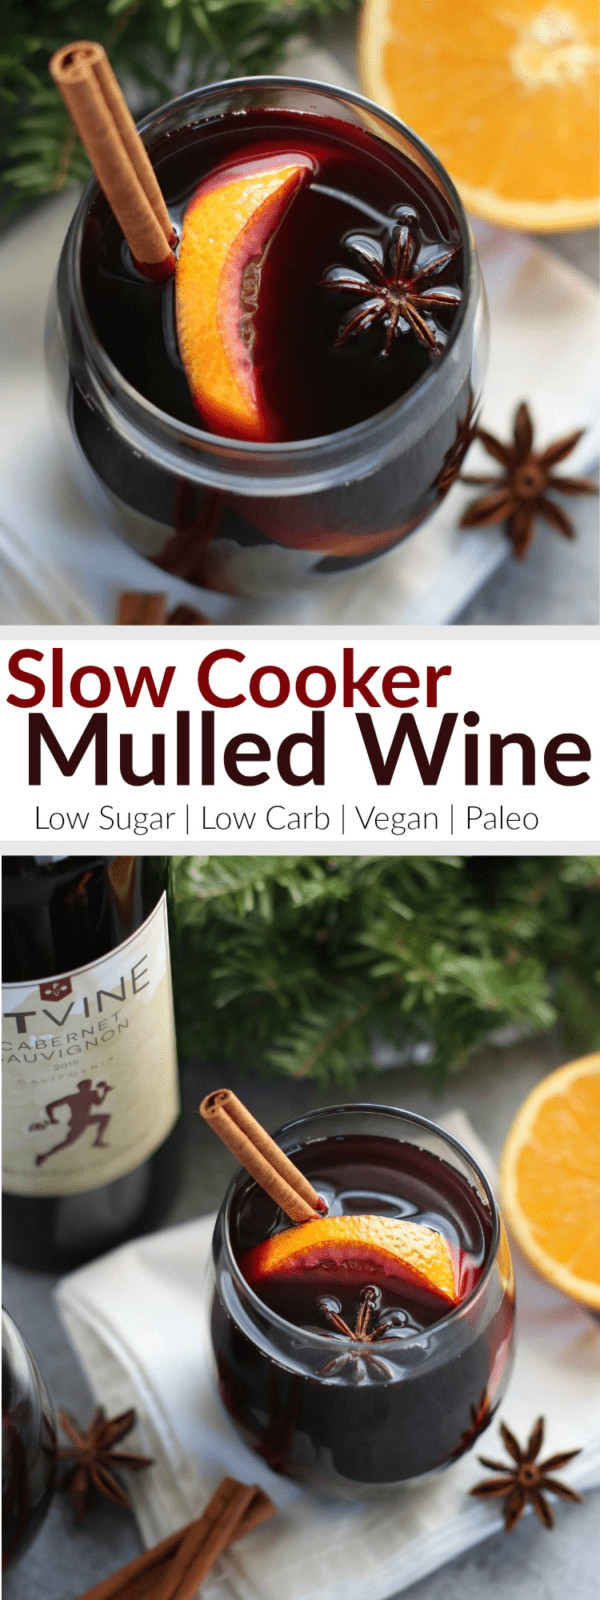 Mulled Wine Recipe Slow Cooker
 Slow Cooker Mulled Wine The Real Food Dietitians